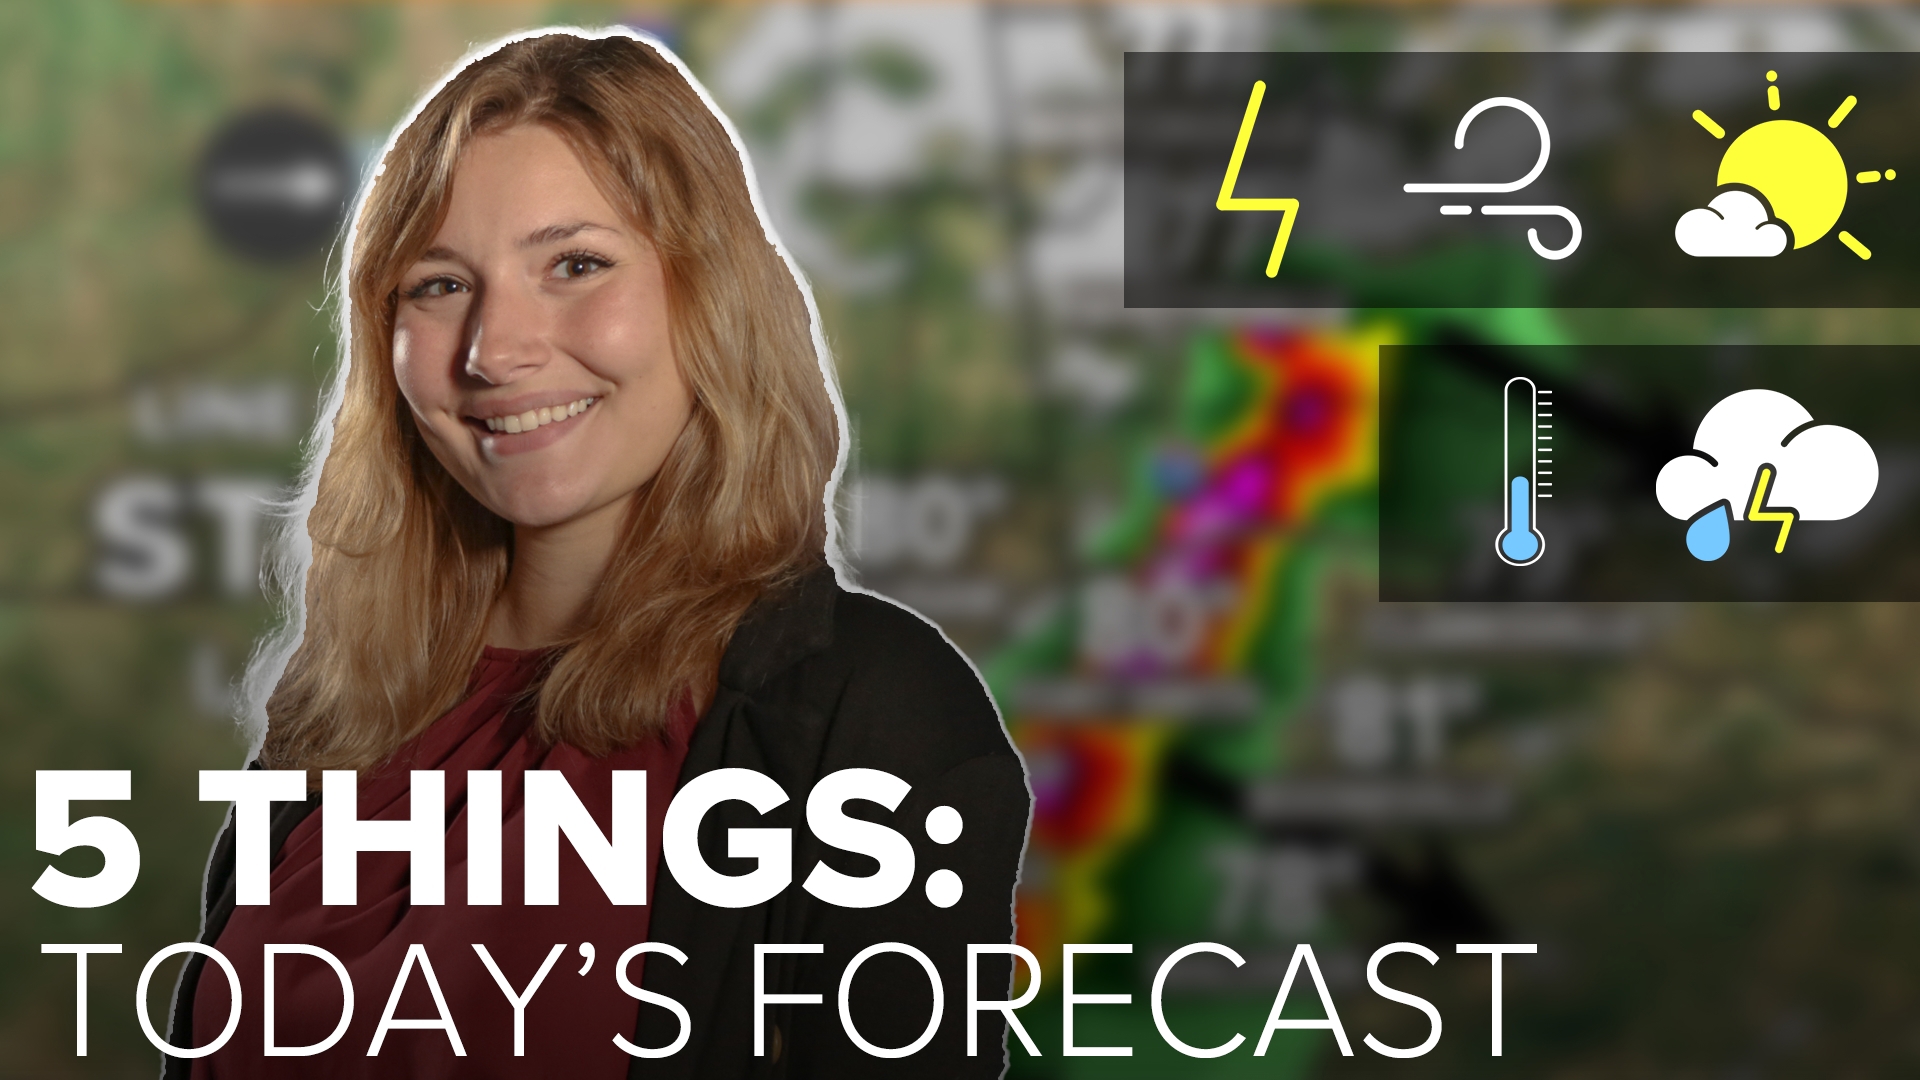 5NEWS Meteorologist Bella Grace is covering what you need to know about today's weather.